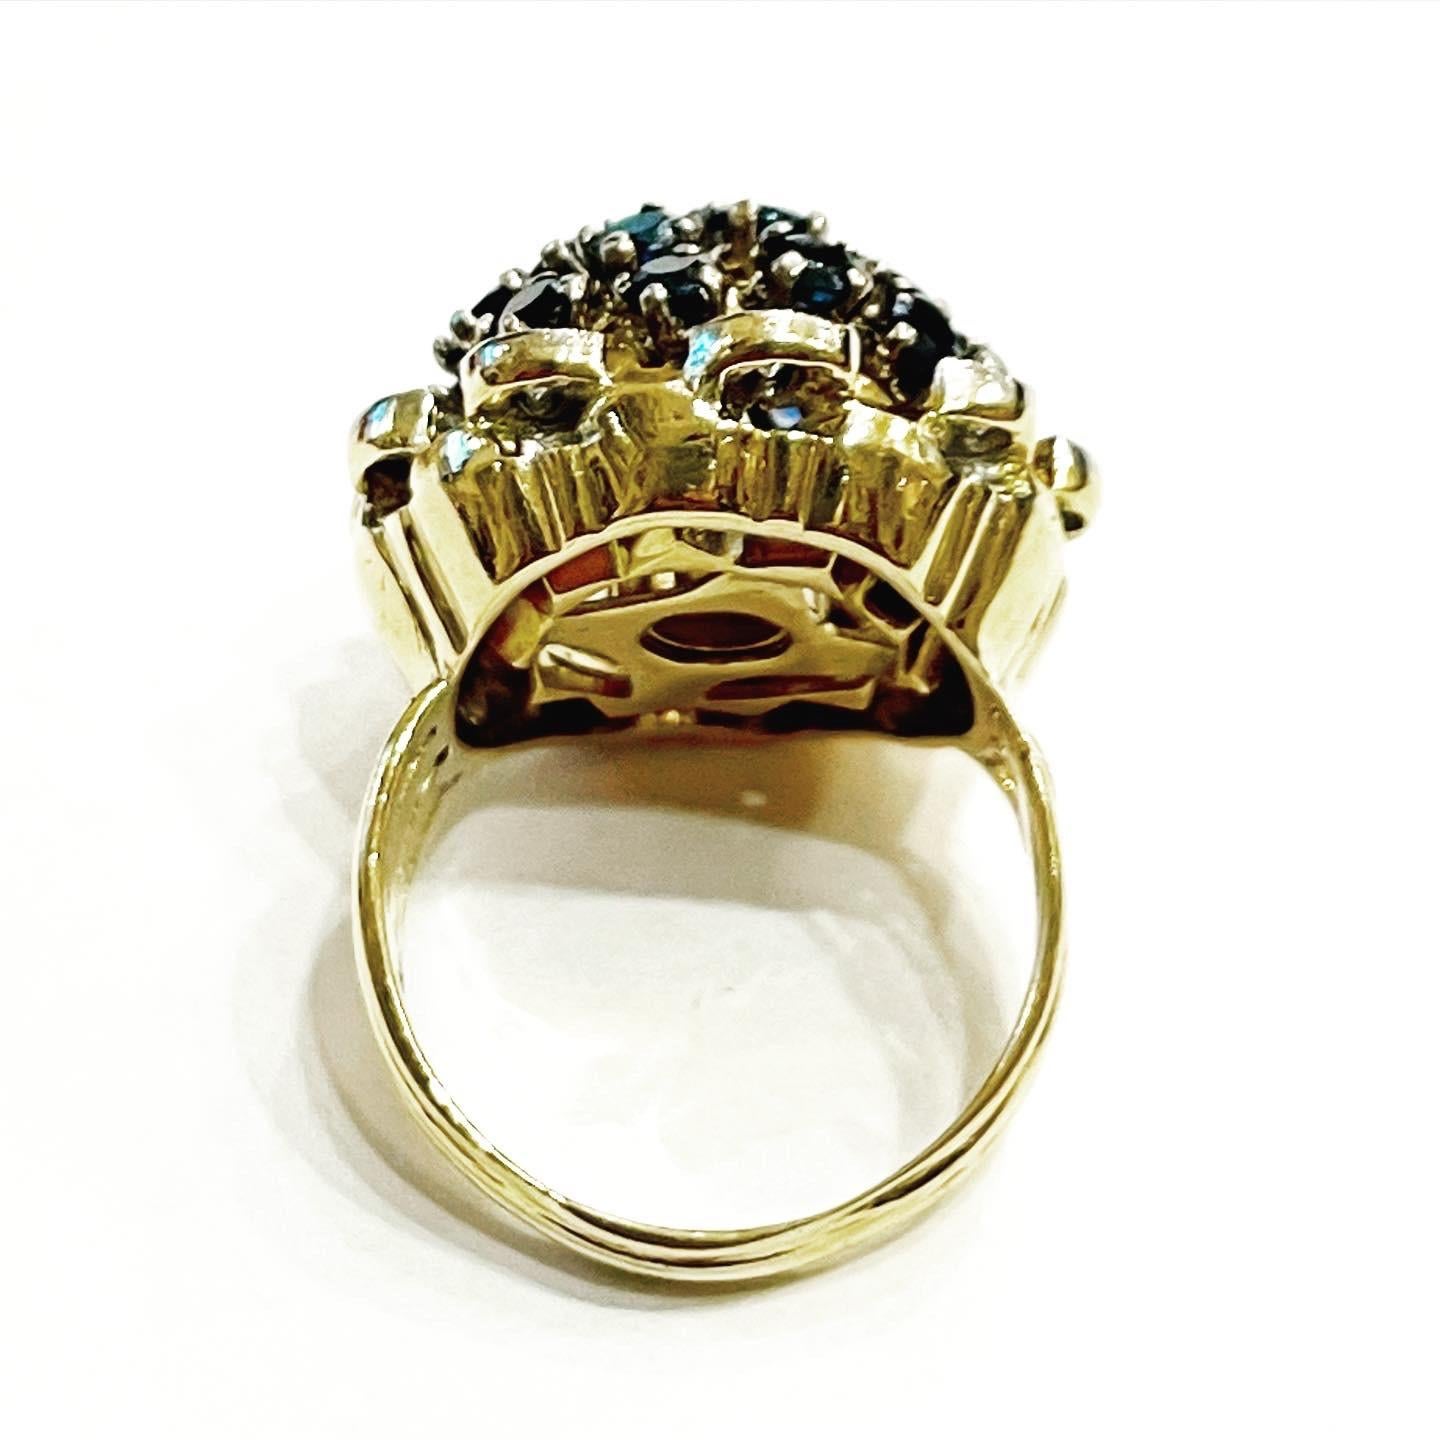 Women's or Men's 1950s Interchangeable 18kt Gold, Diamond, Pearls, Ruby, Sapphire Fashion Ring